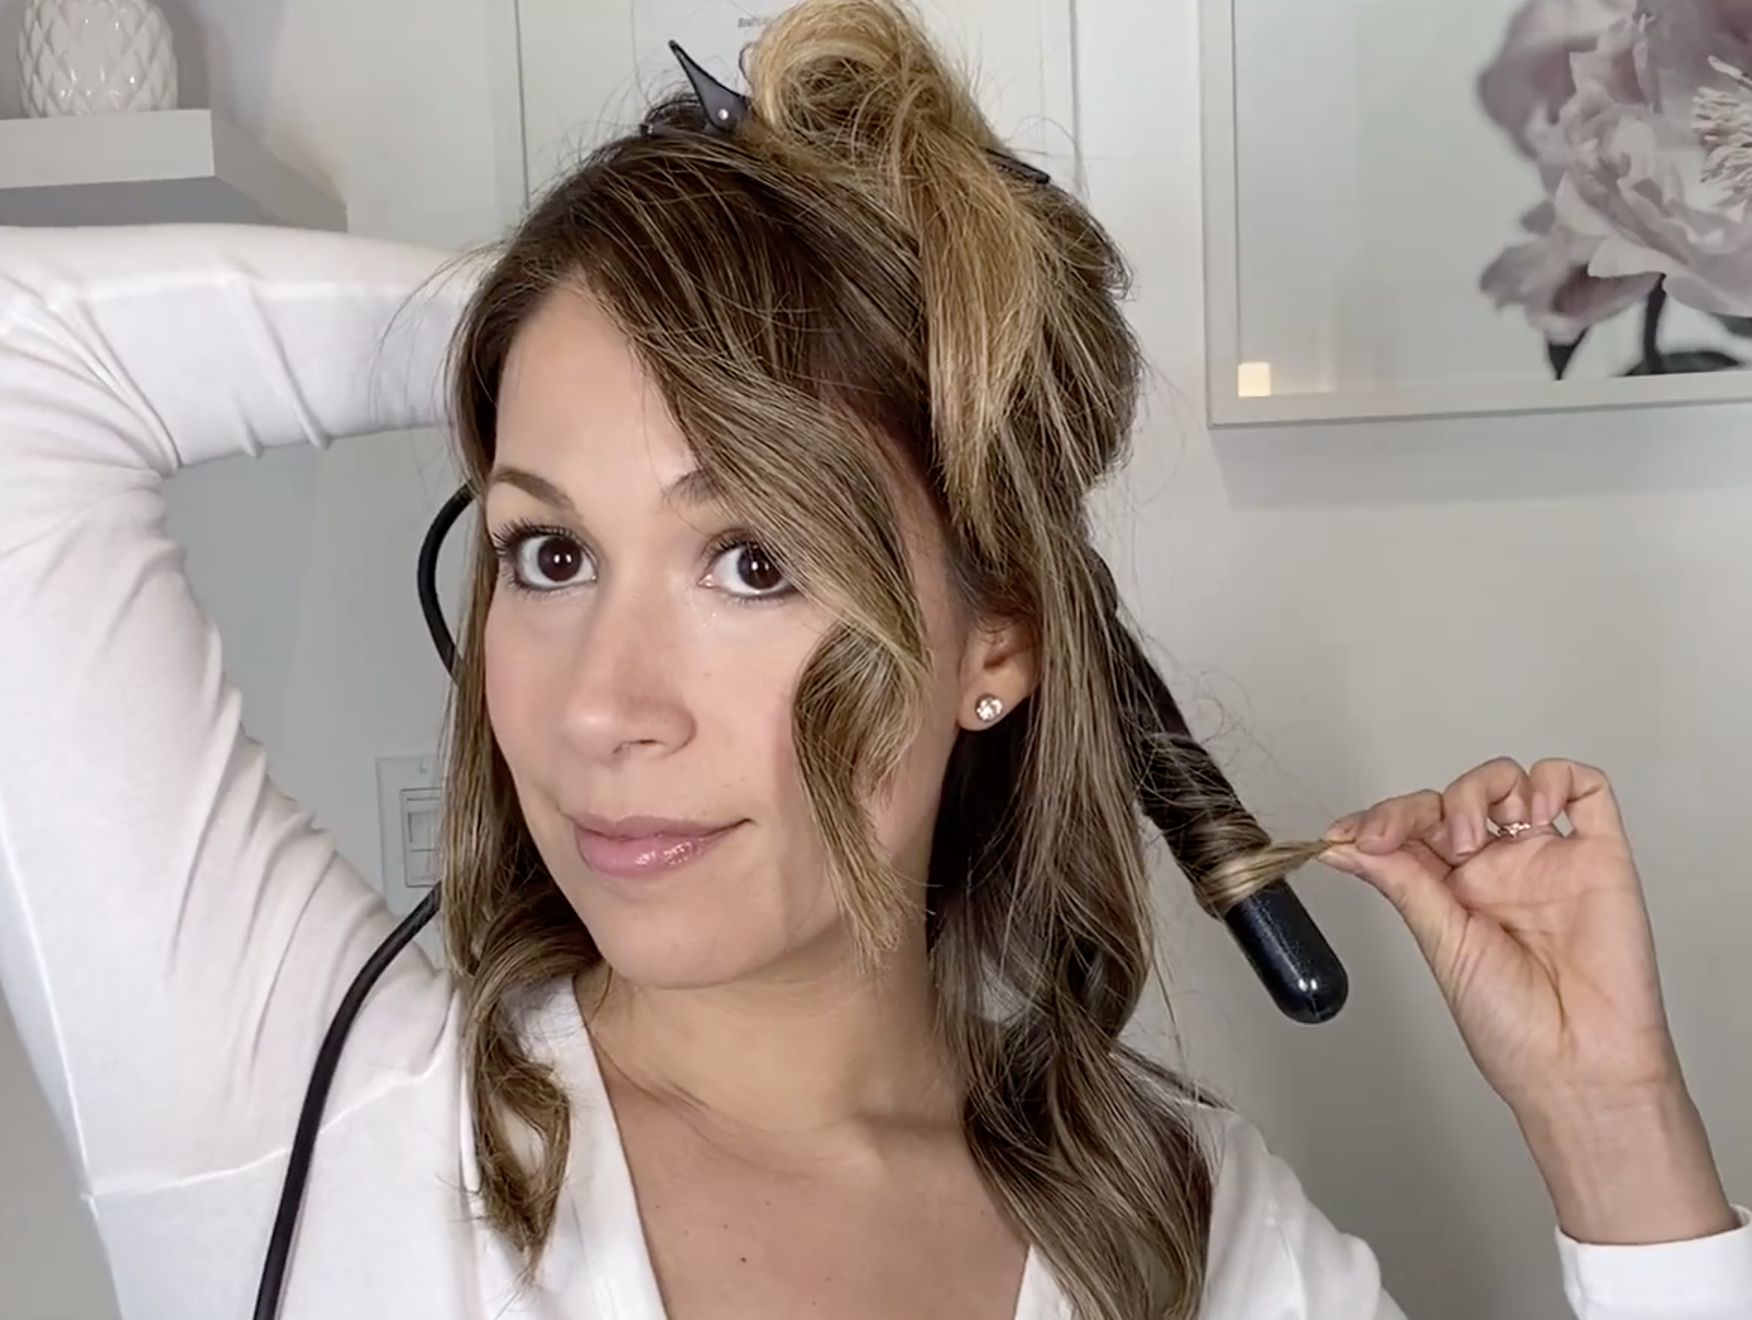 Model is curling their hair with the wand